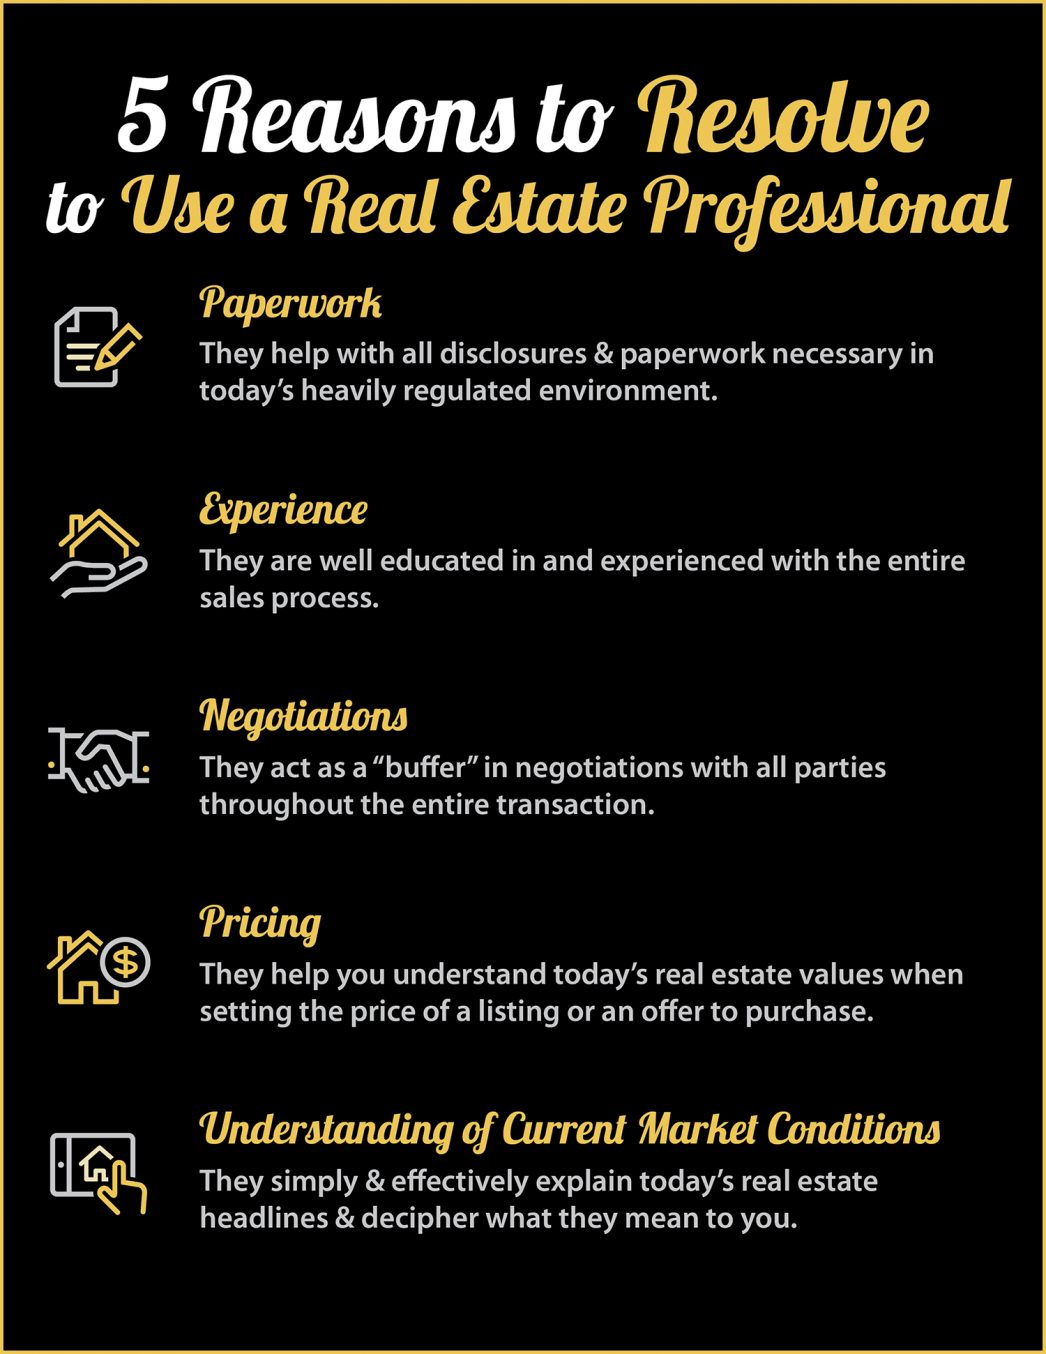 Buying or Selling in 2018? 5 Reasons to Resolve to Hire a Pro [INFOGRAPHIC] | MyKCM